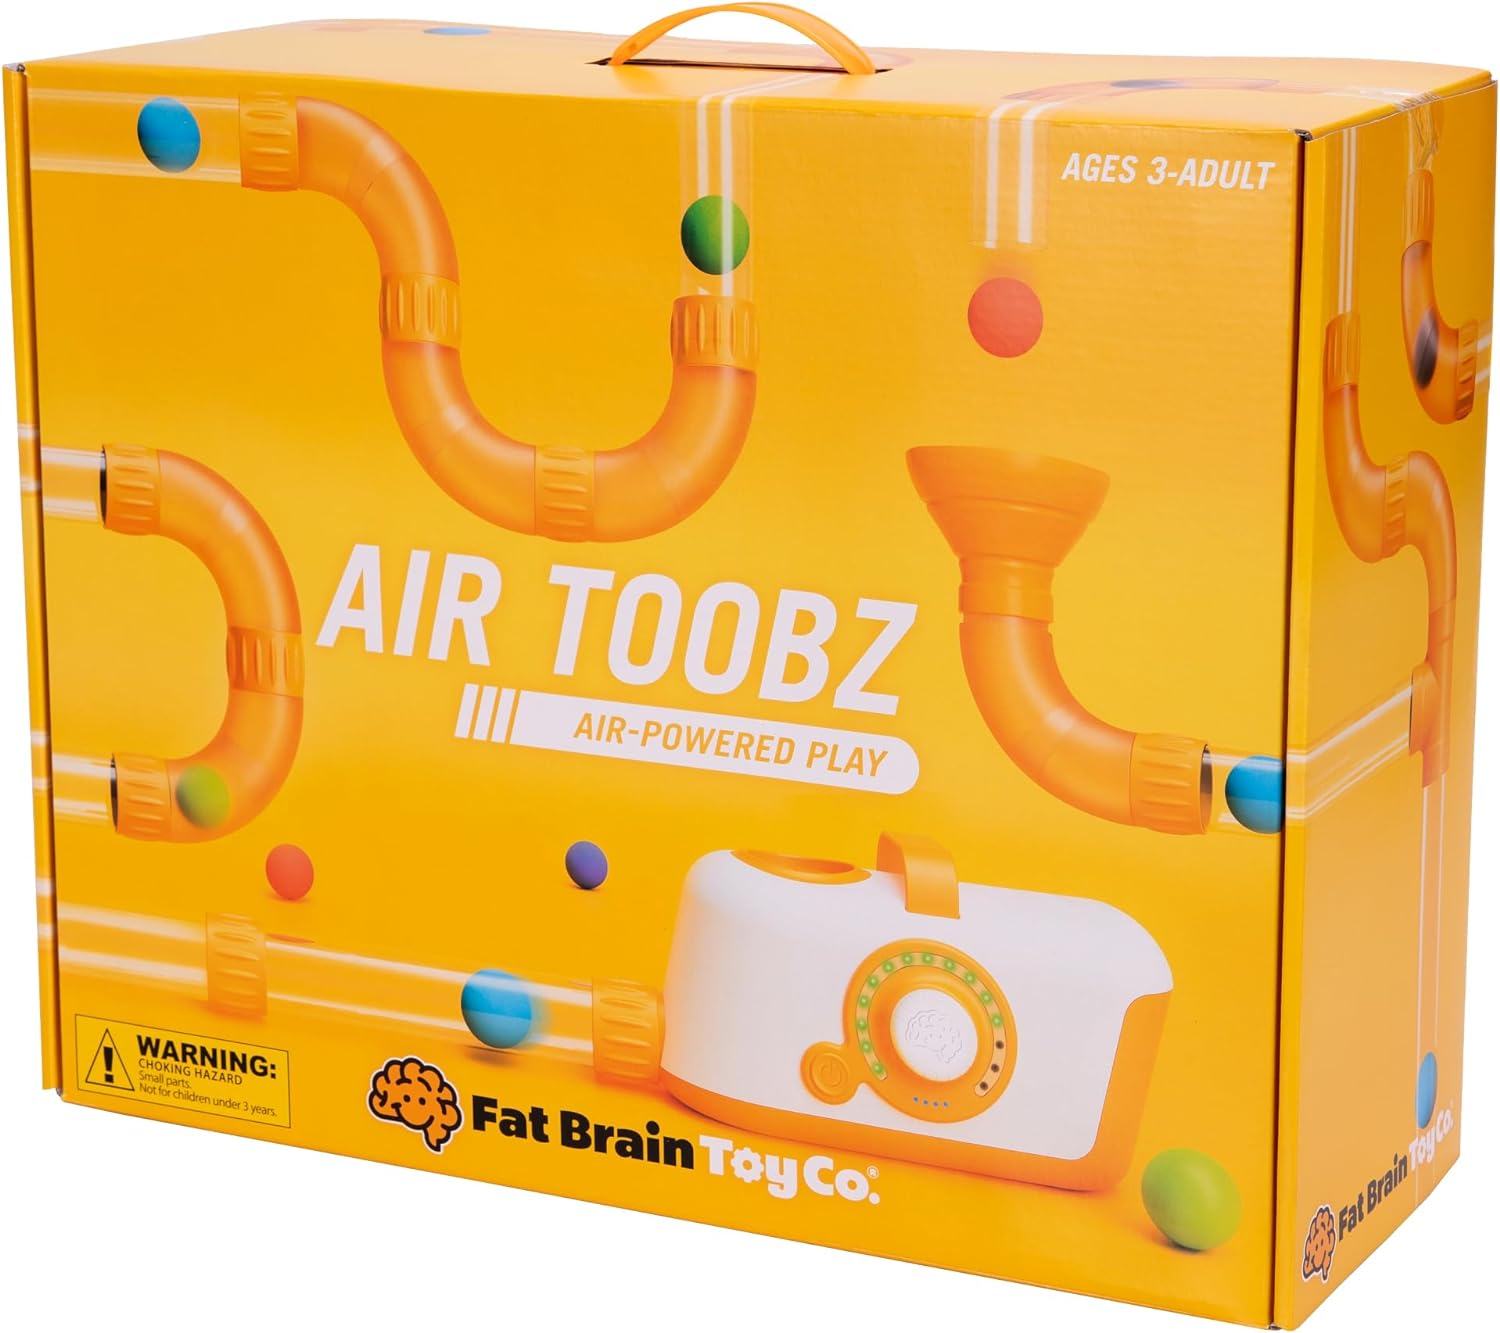 Air Toobz product package.